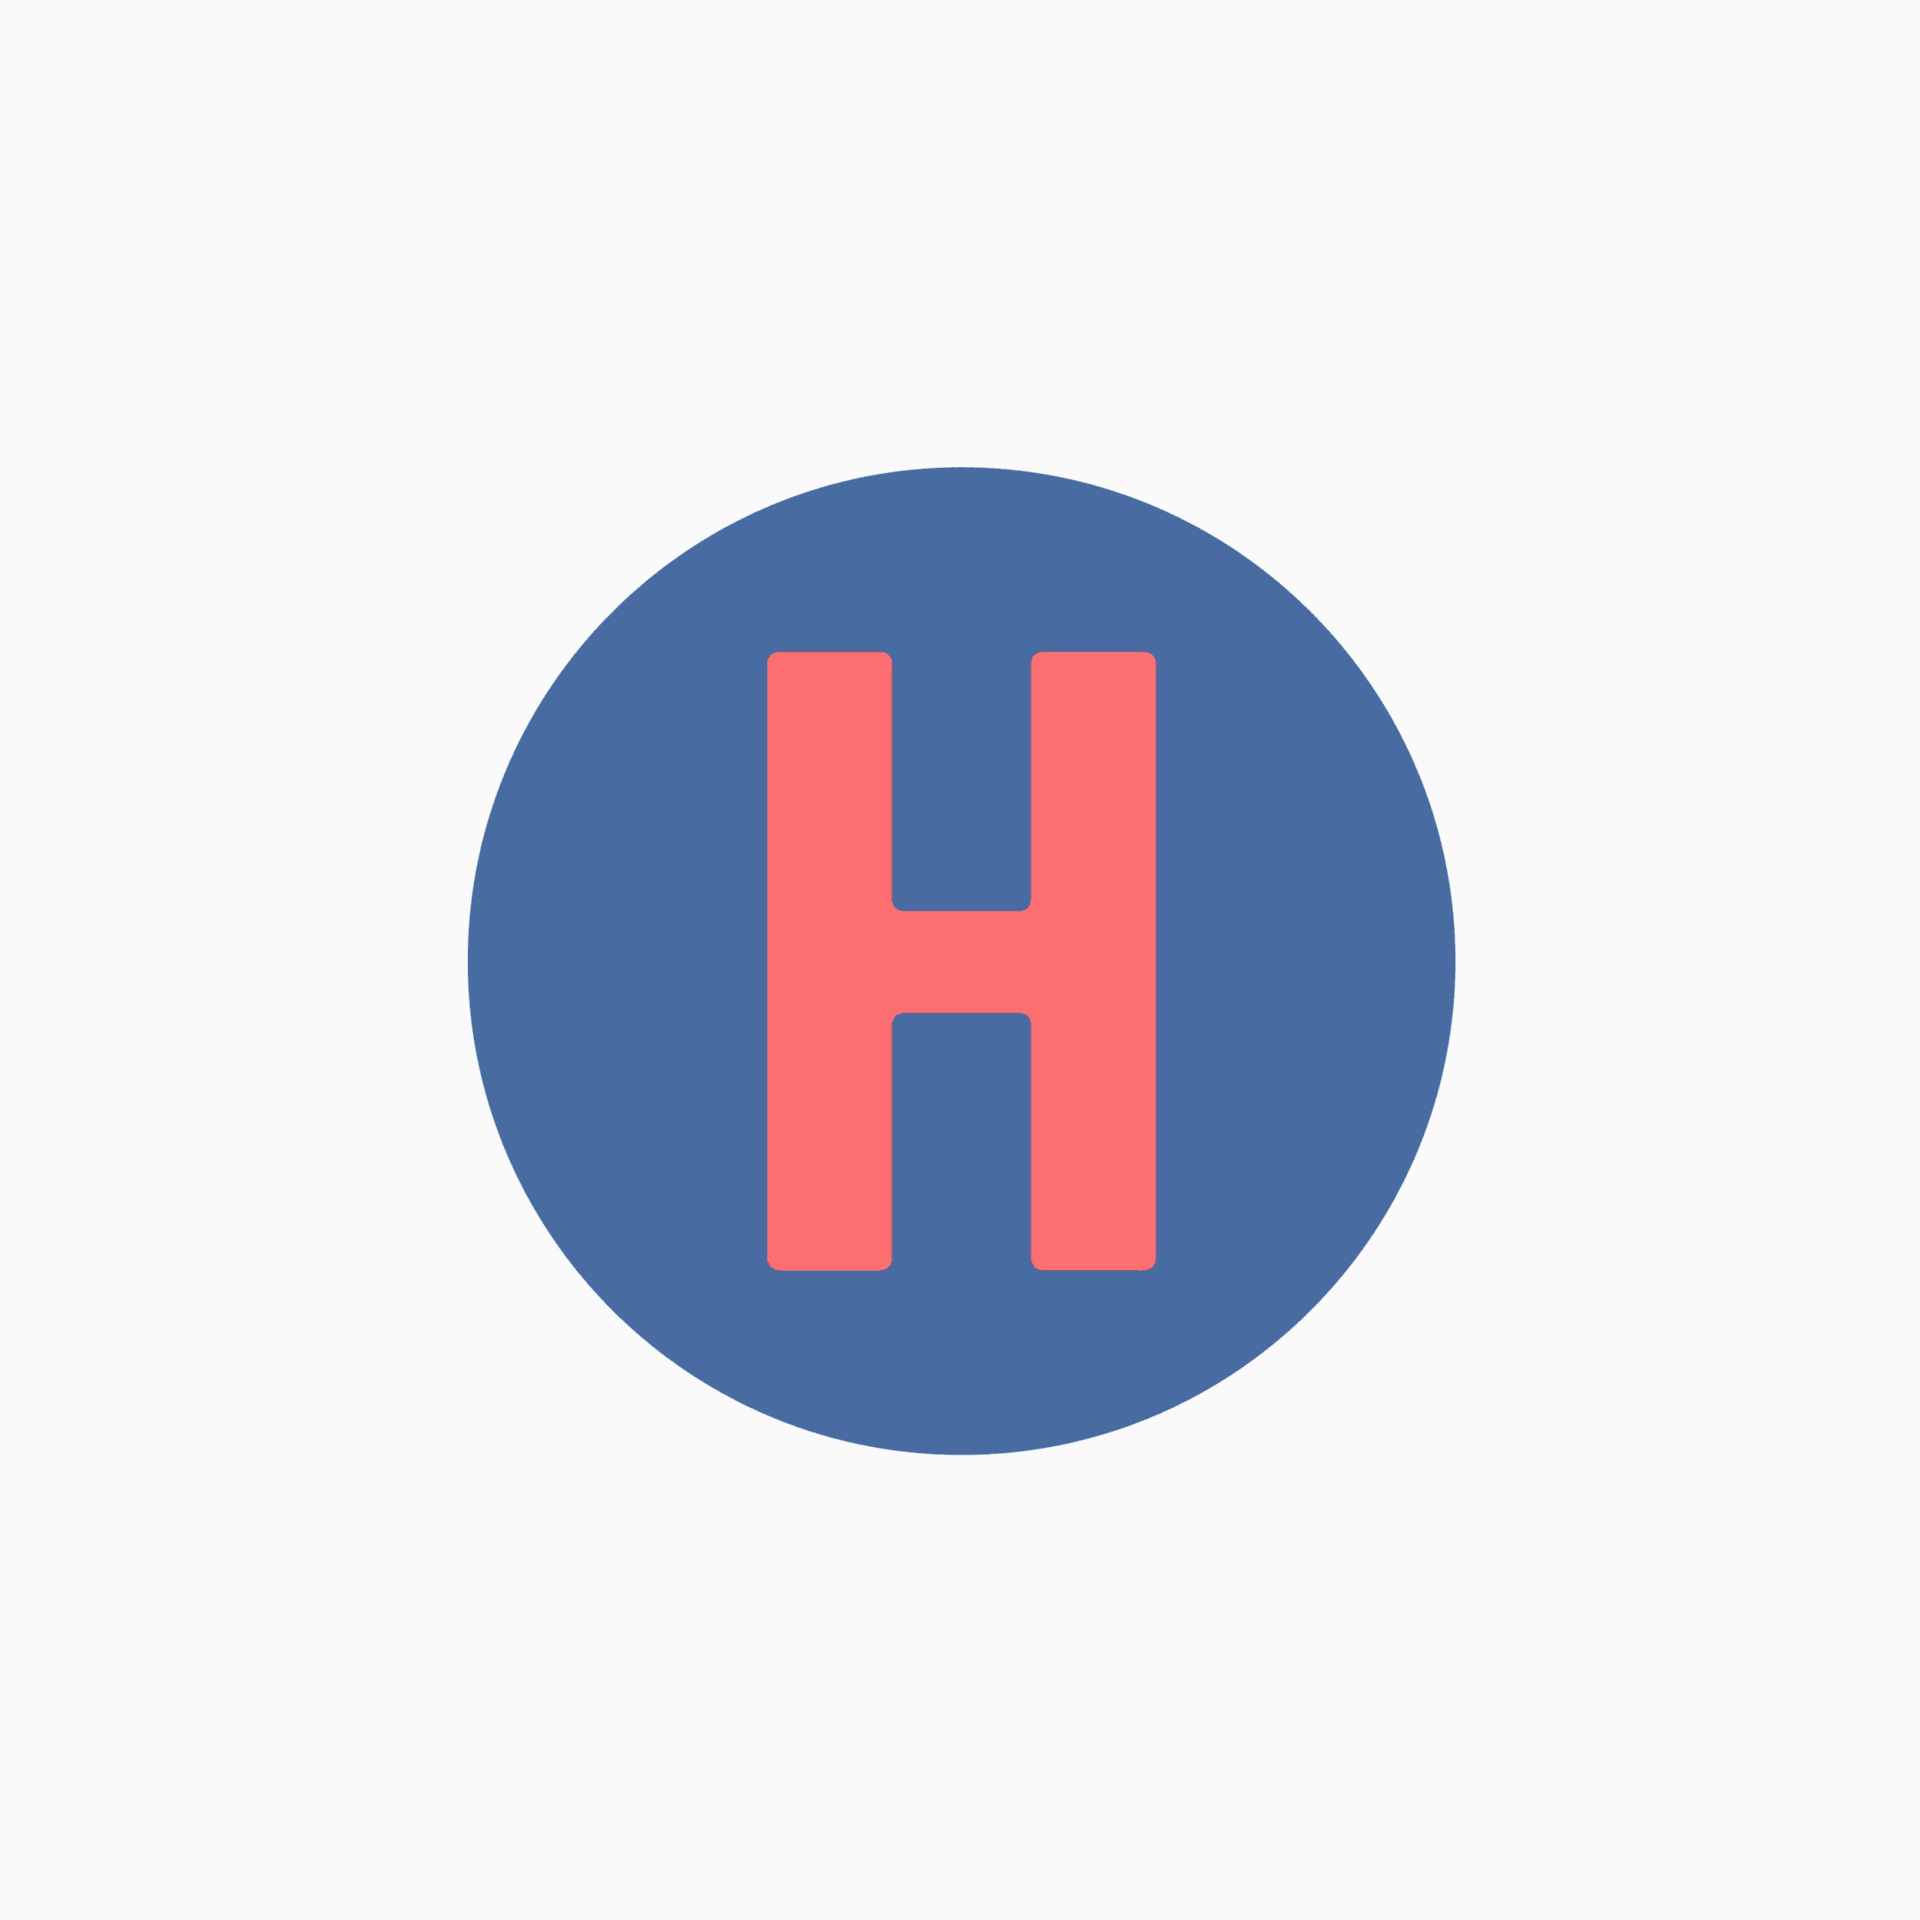 Logo by Bedow for Stockholm-based co-working space Helio